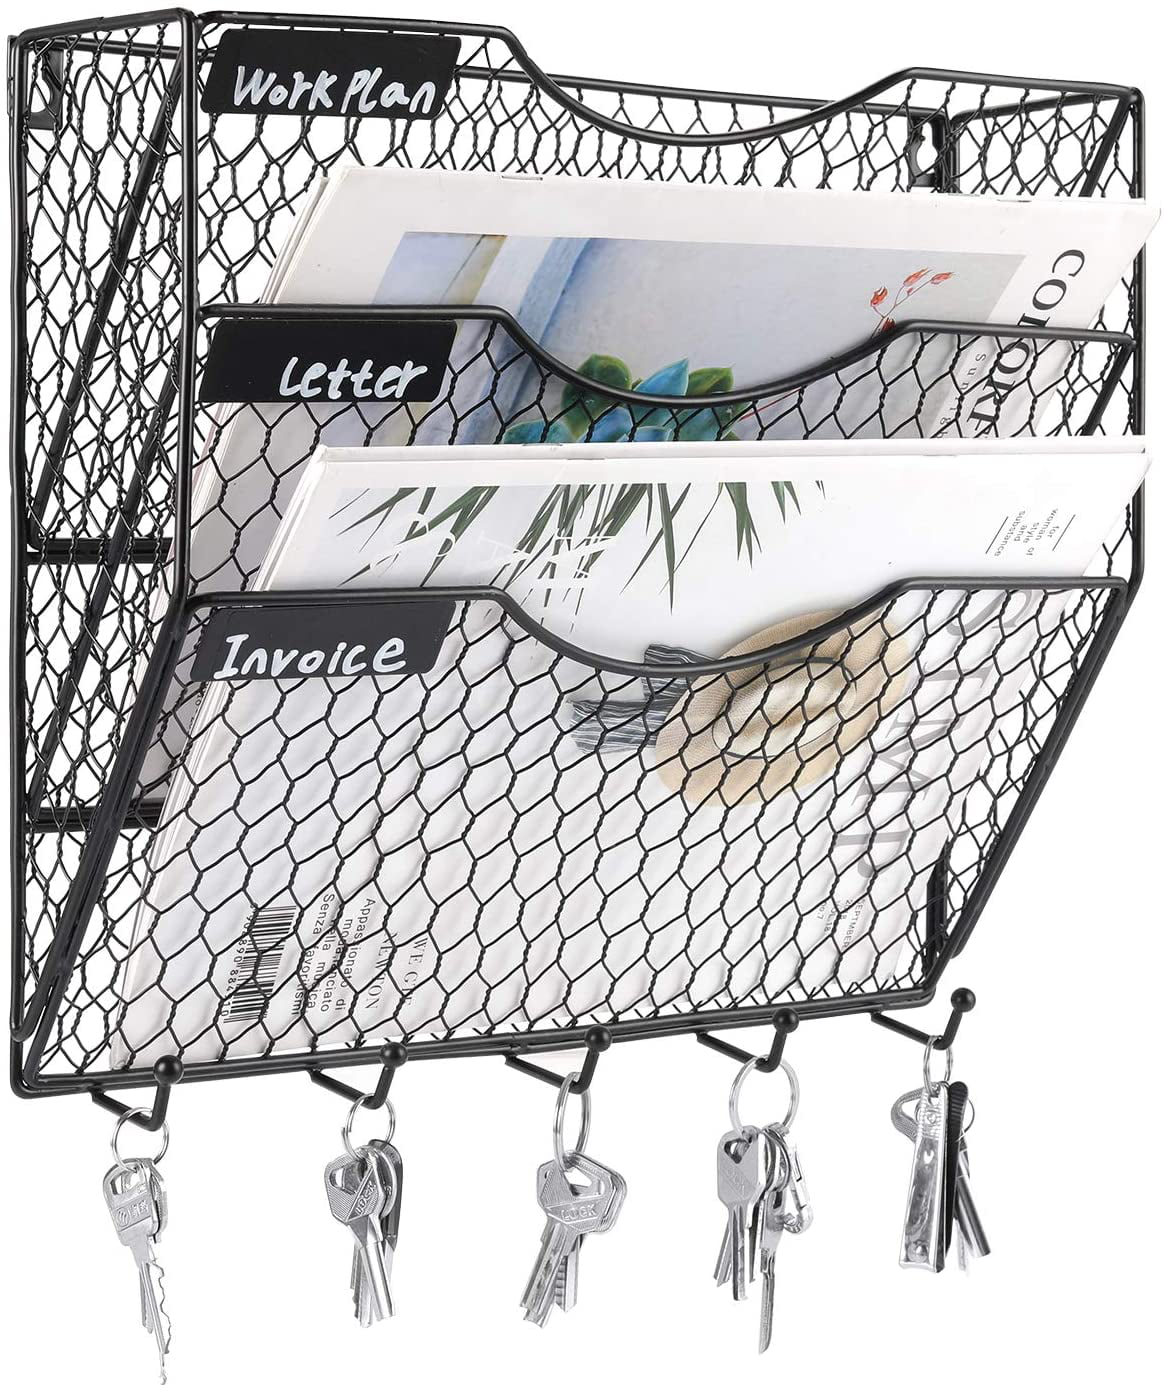 3 Pack Wall Mounted File Holder Hanging Mesh Metal Basket Wire Magazine Rack Shelf with 10 Accessory Hooks Name Tag Slot Black 